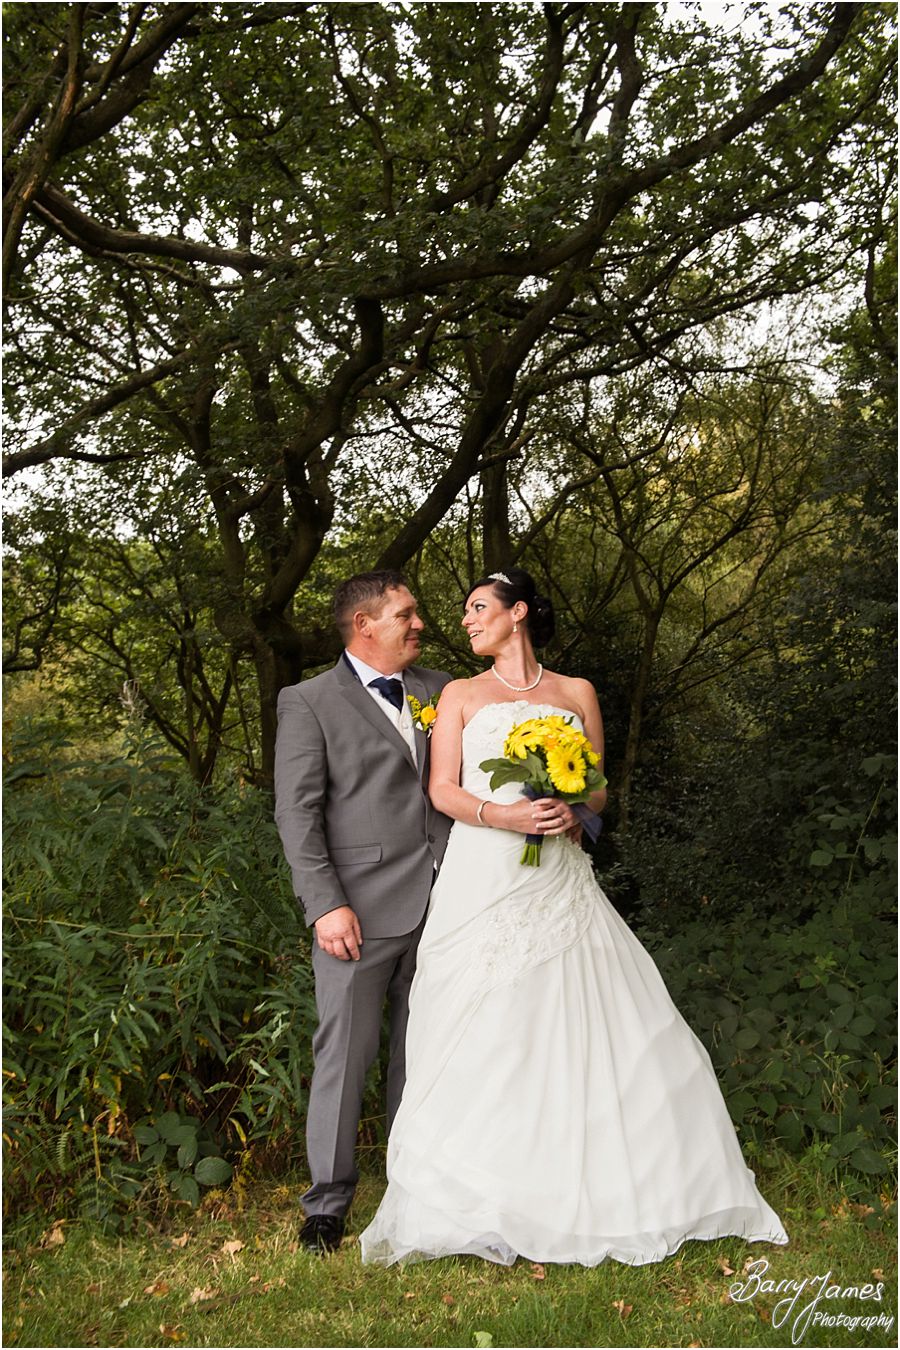 Contemporary and candid wedding photographs at Shoal Hill in Cannock Chase by Experienced Contemporary Candid and Creative Wedding Photographer Barry James